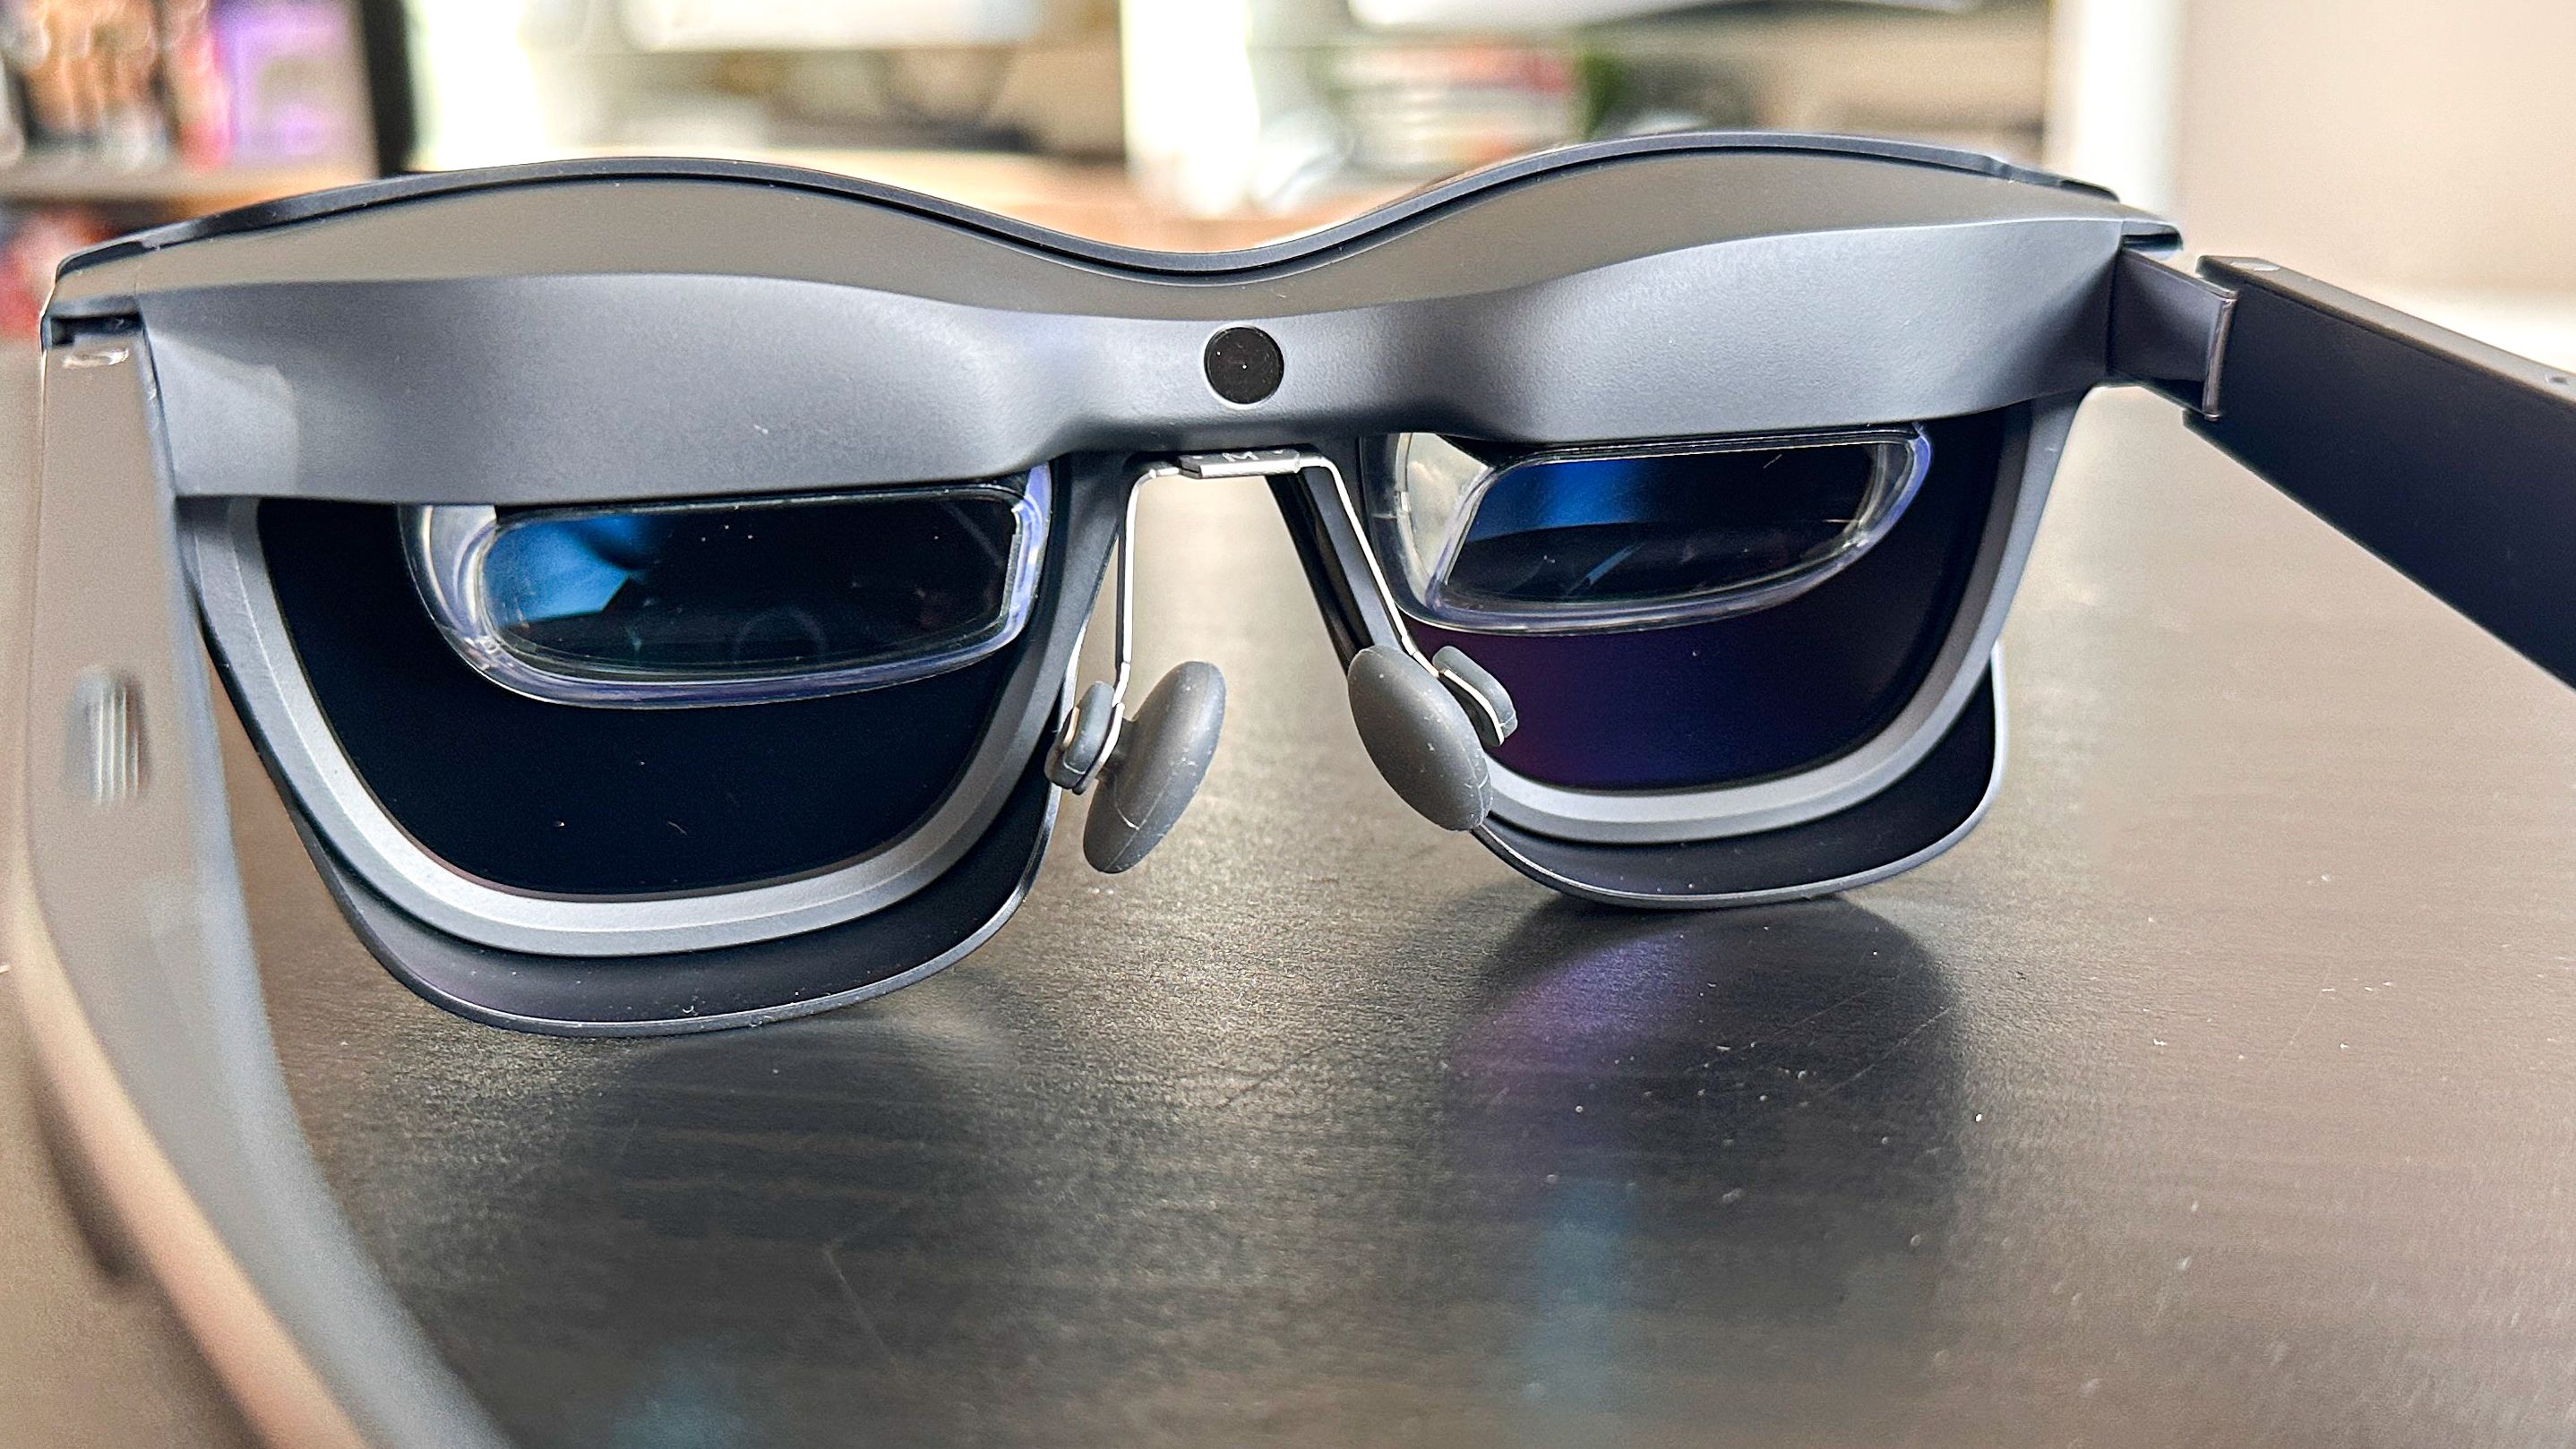 Xreal Air 2 Ultra AR Glasses: The Affordable Apple Vision Pro